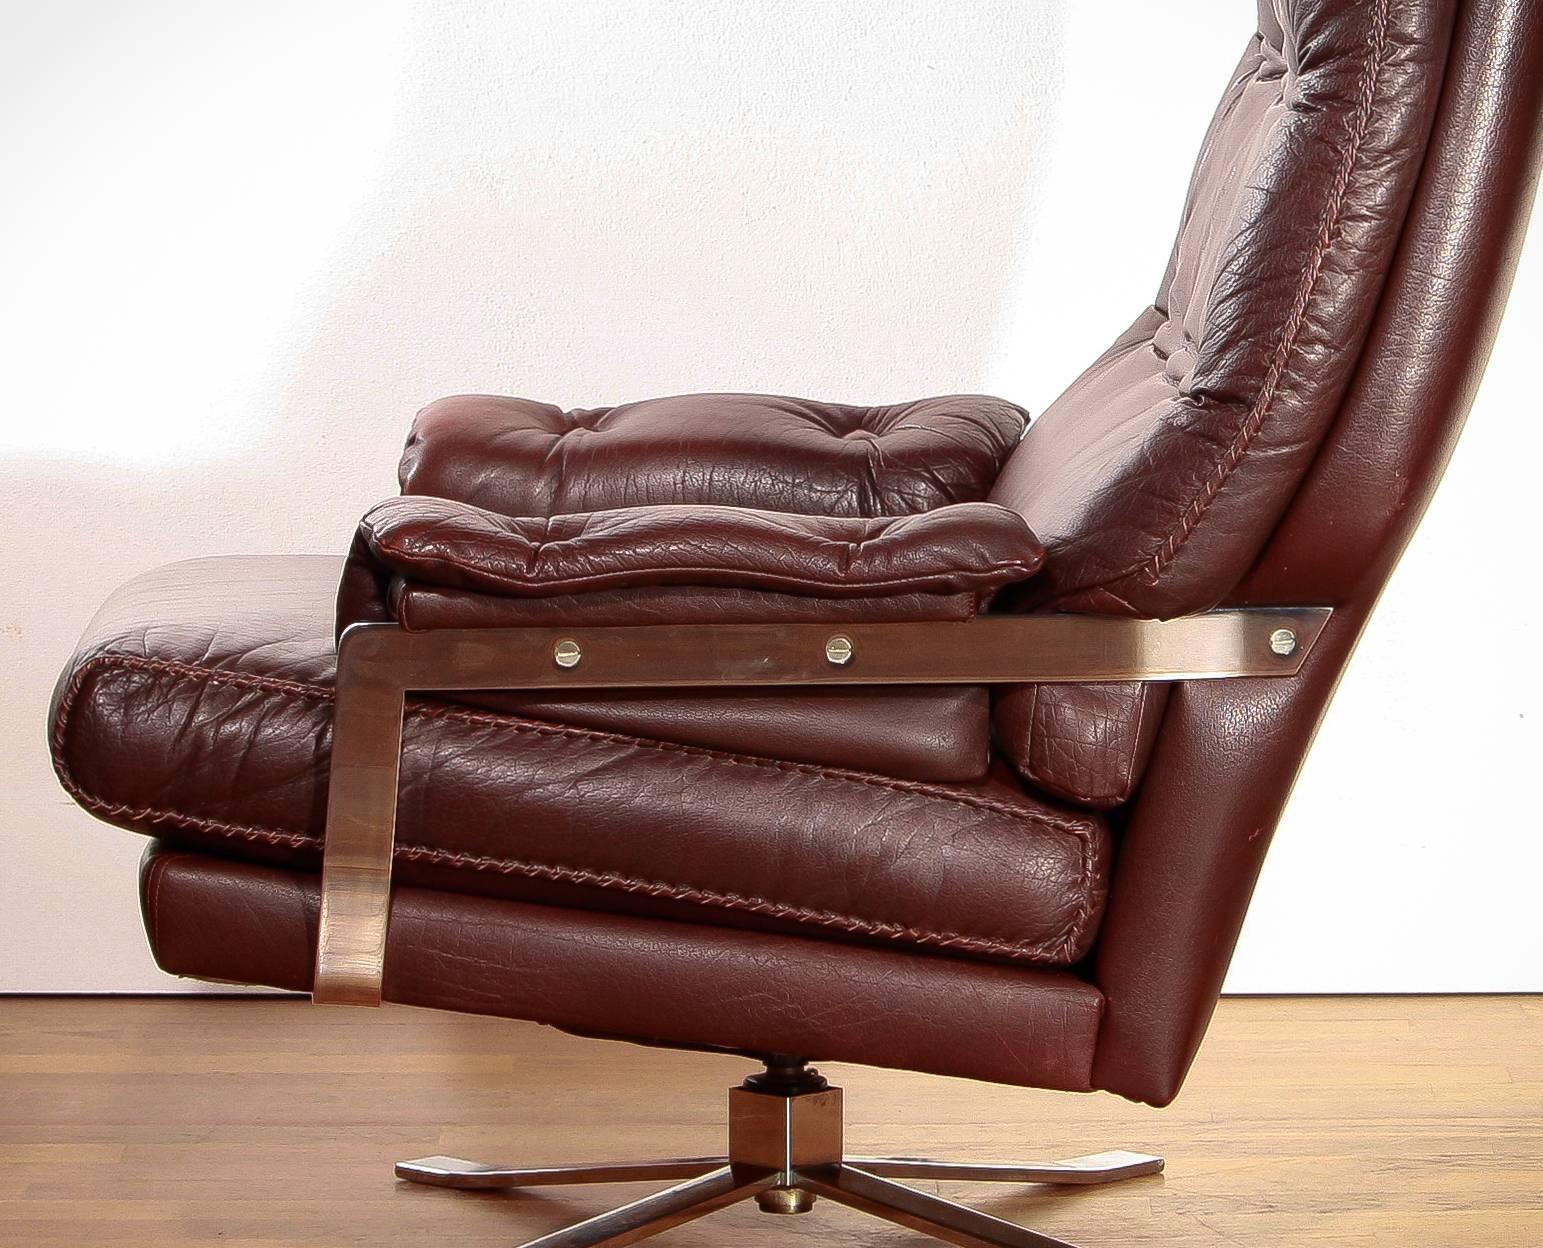 Beautiful high quality leather lounge chair and ottoman designed by Arne Norell and produced by Vatne Møbler.
The leather is hand-stitched.
Period 1960s.
We have two chairs and one ottoman in stock .